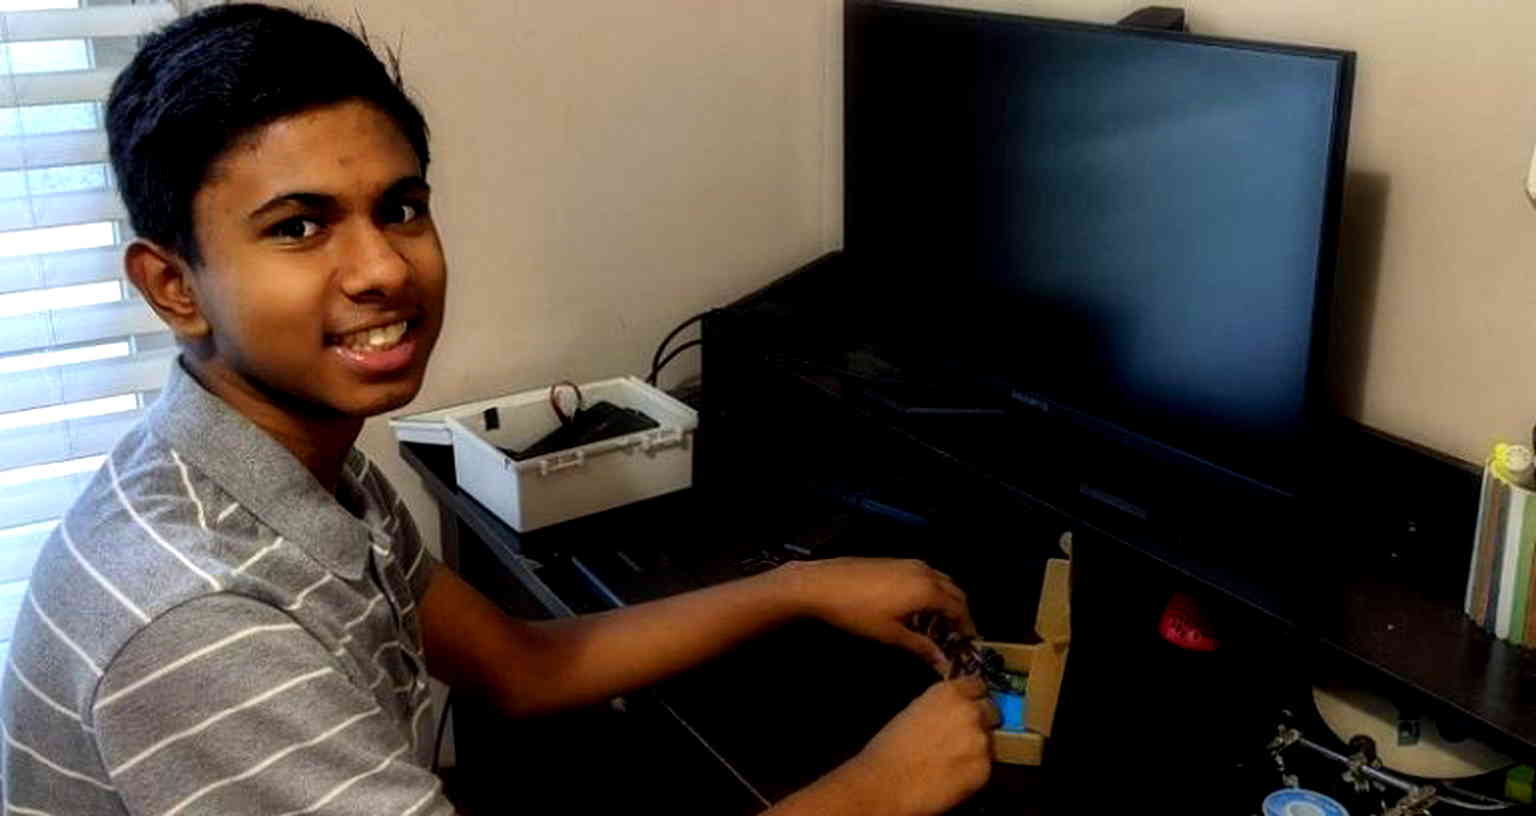 Indian American student wins Inventor Award for 2nd year in a row for ‘Lungsaver’ system